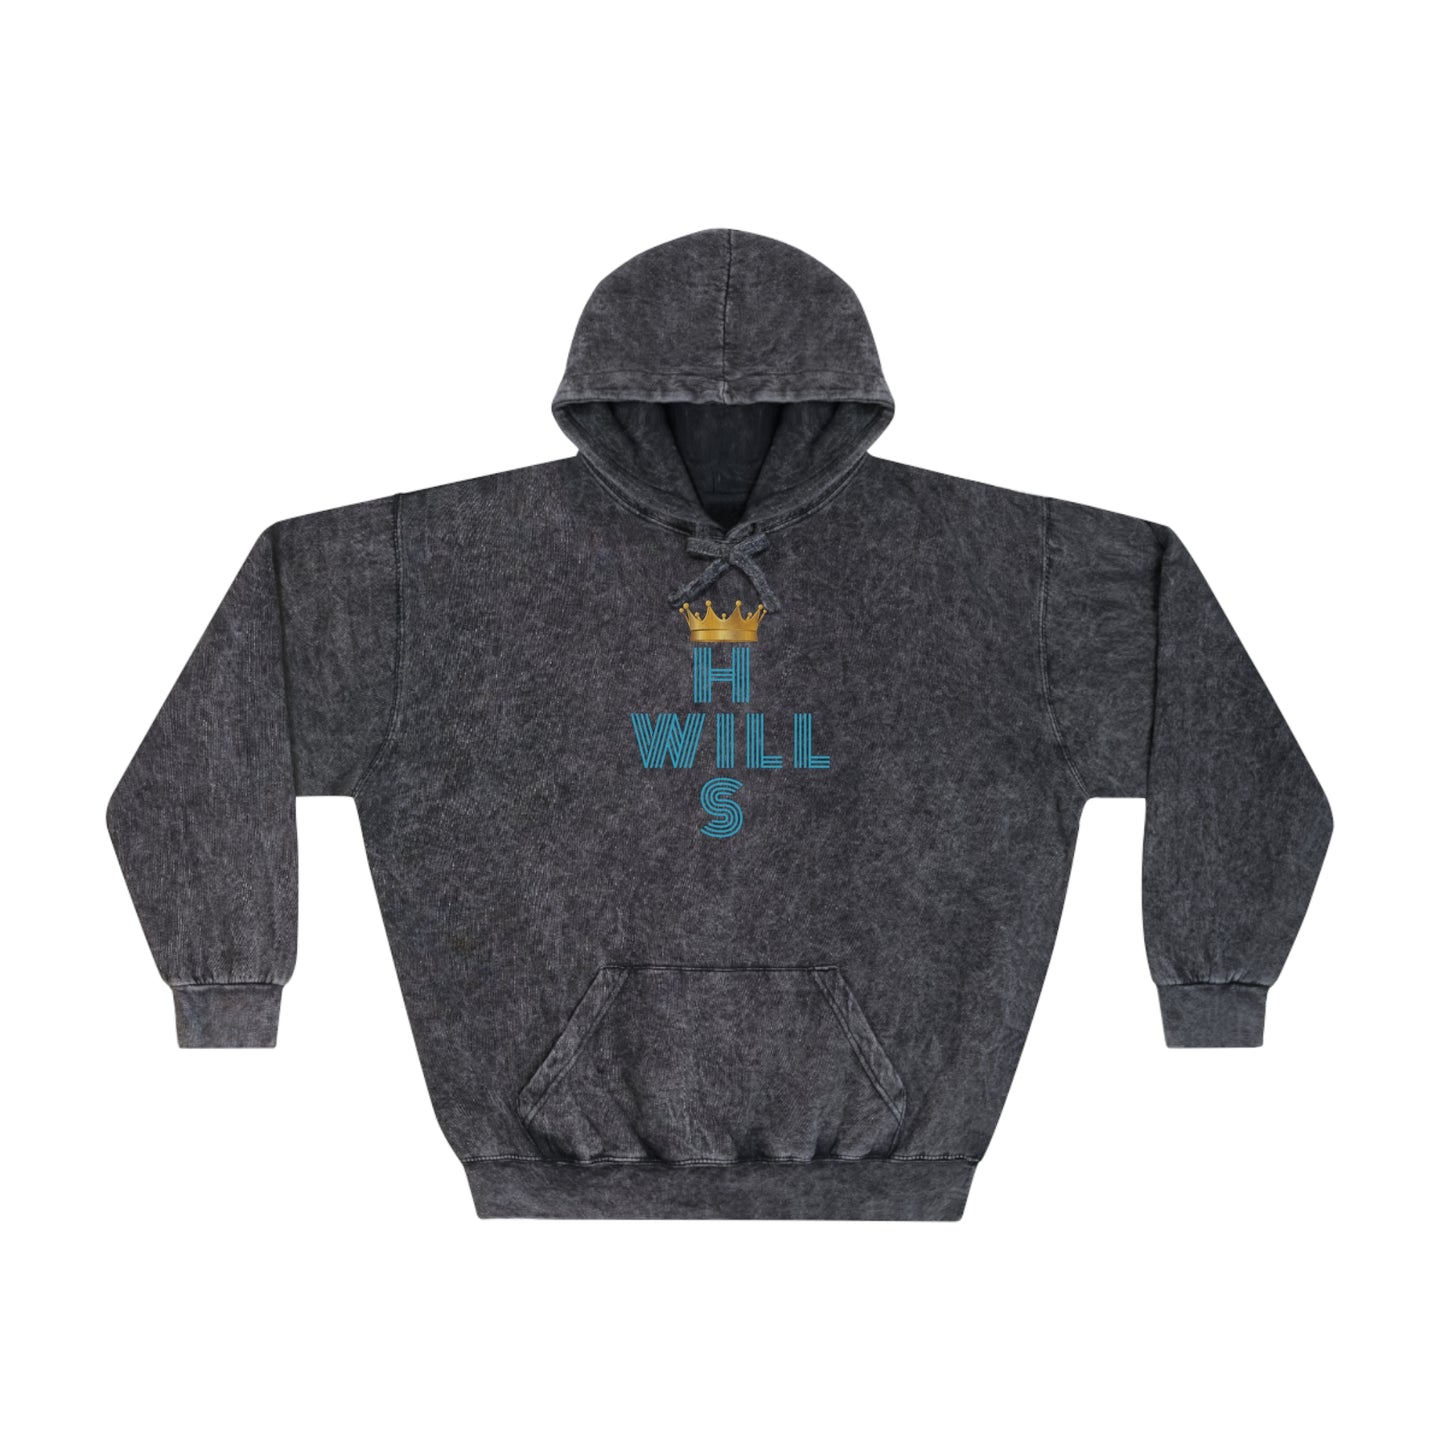 "HIS WILL" Mineral Wash Hoodie